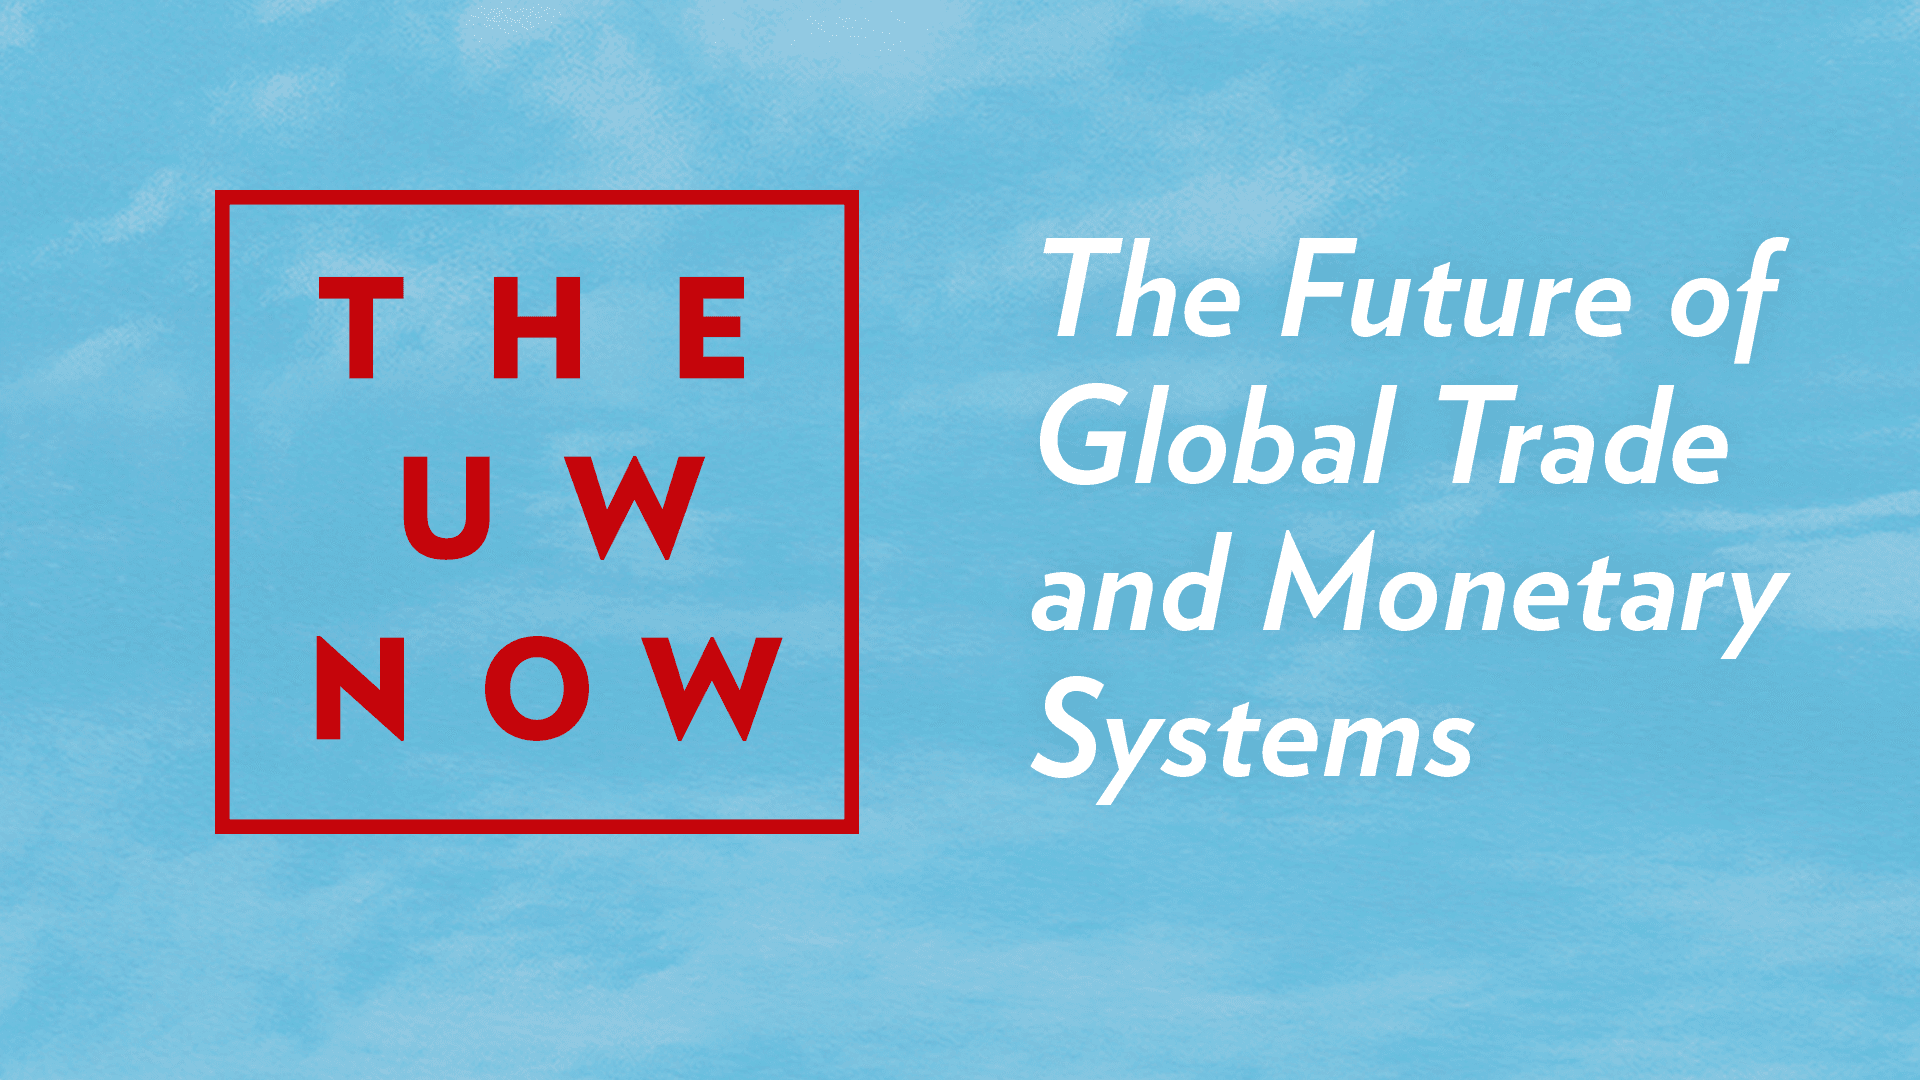 The Future of Global Trade and Monetary Systems